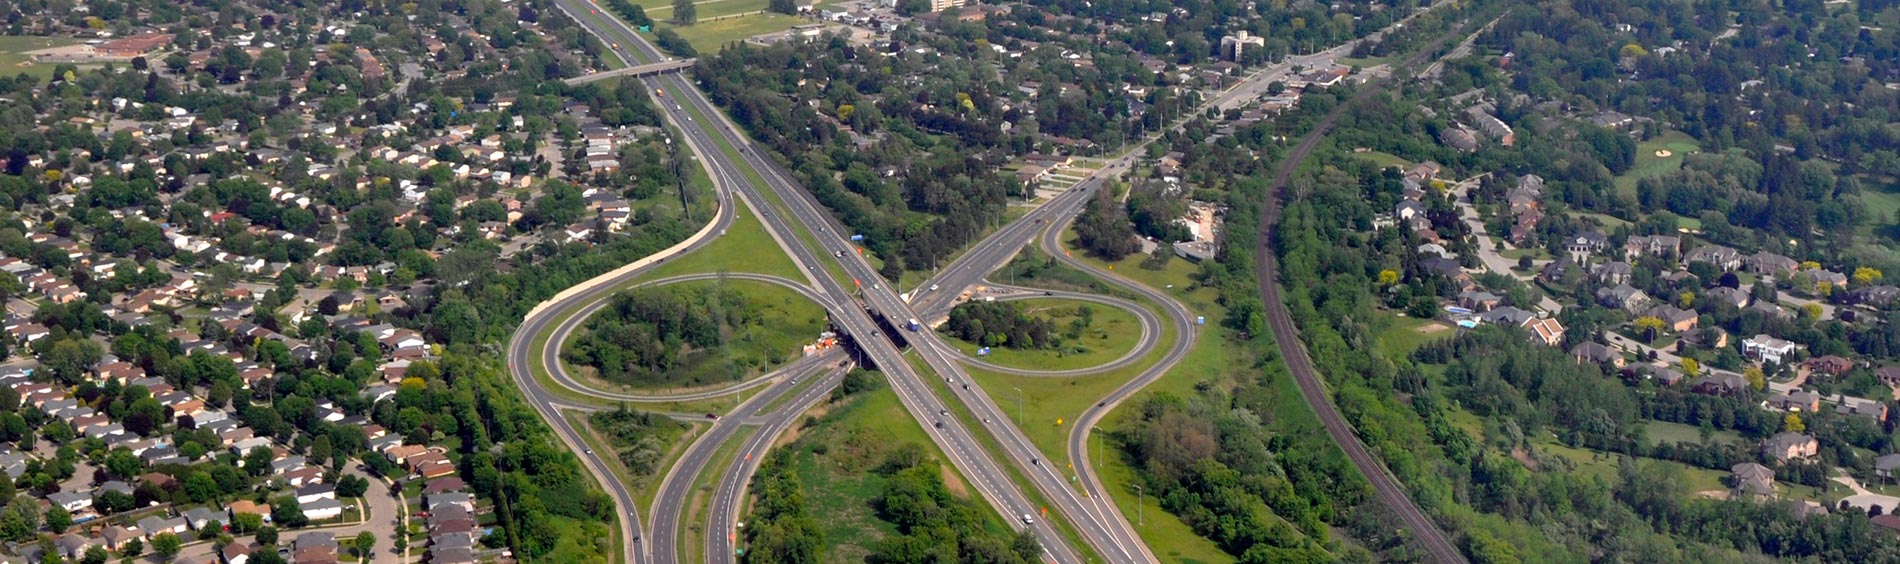 Areal view of highways